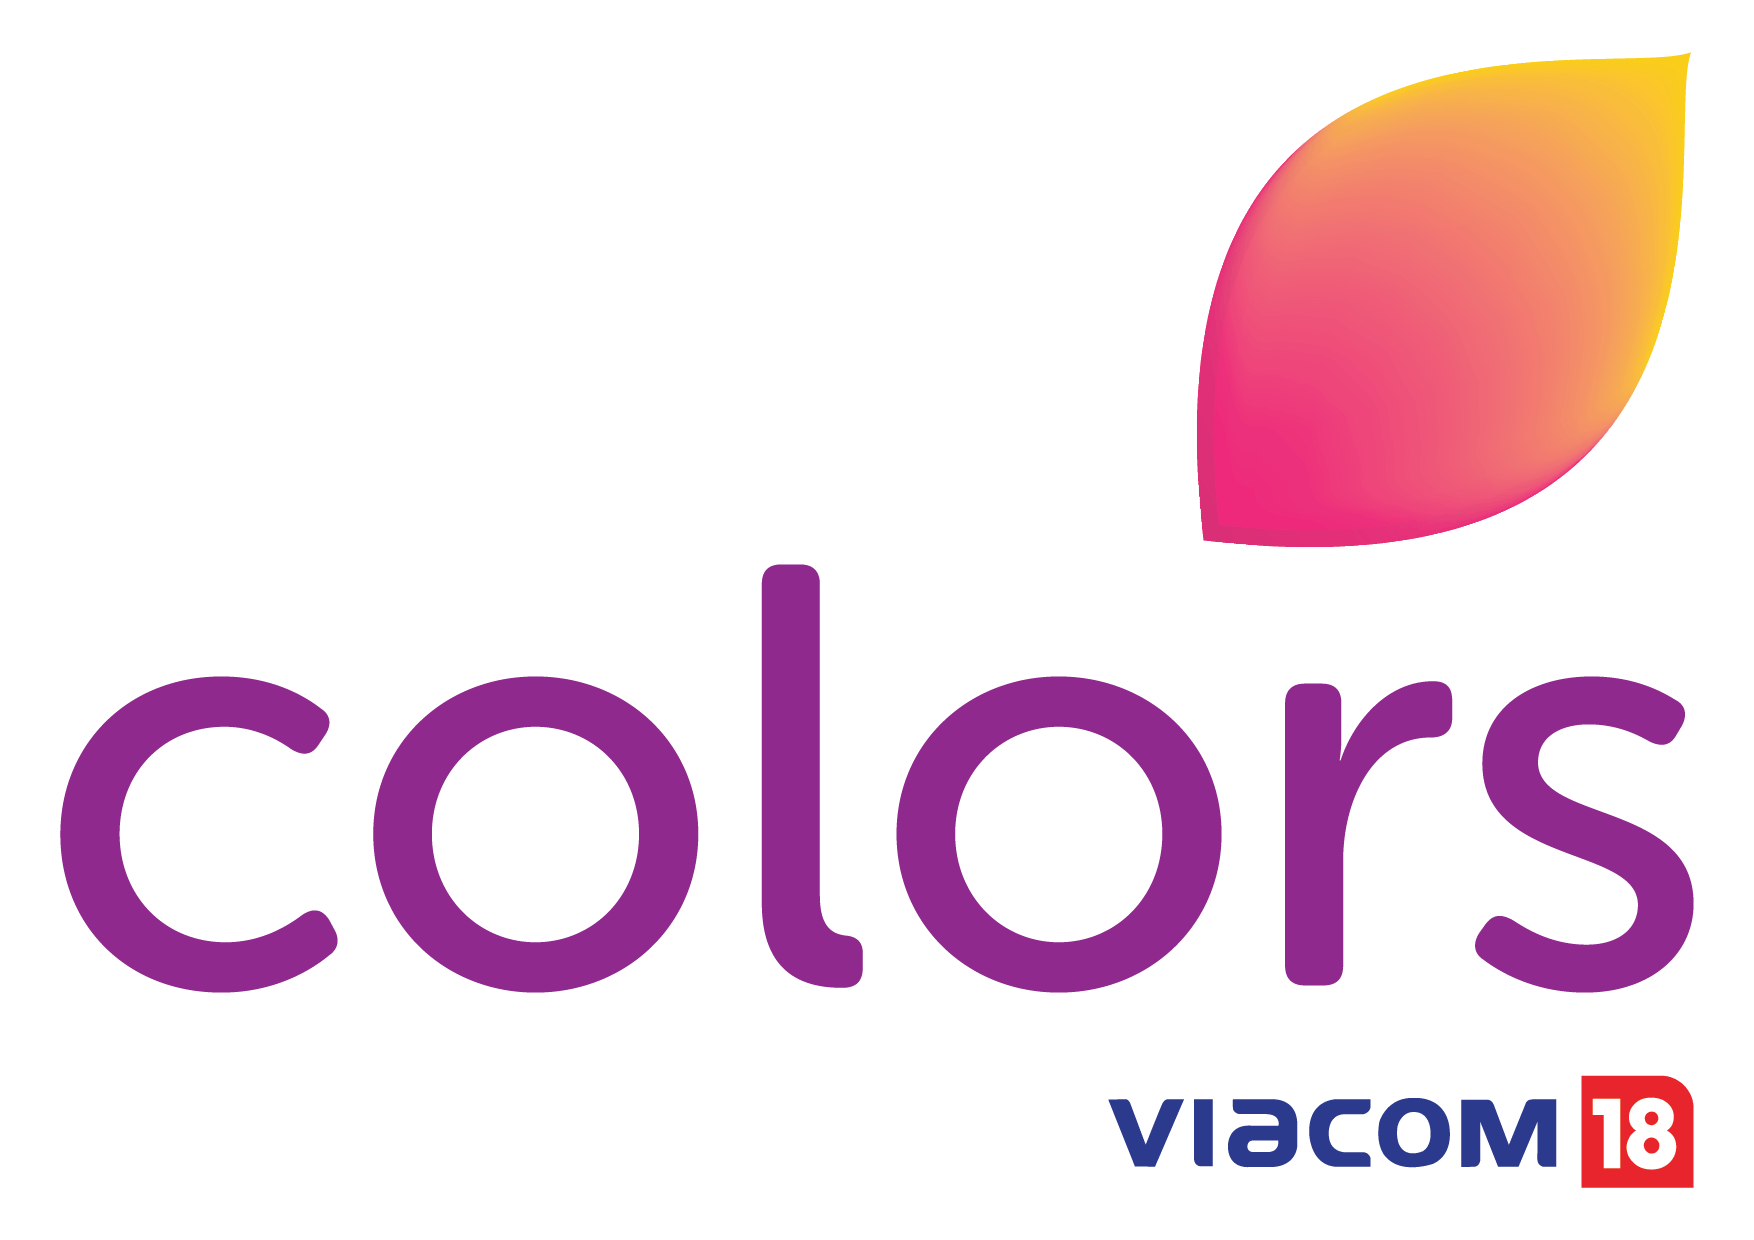 Violet Colored Logo - Image - Colors-tv-logo-purple.png | Logopedia | FANDOM powered by Wikia